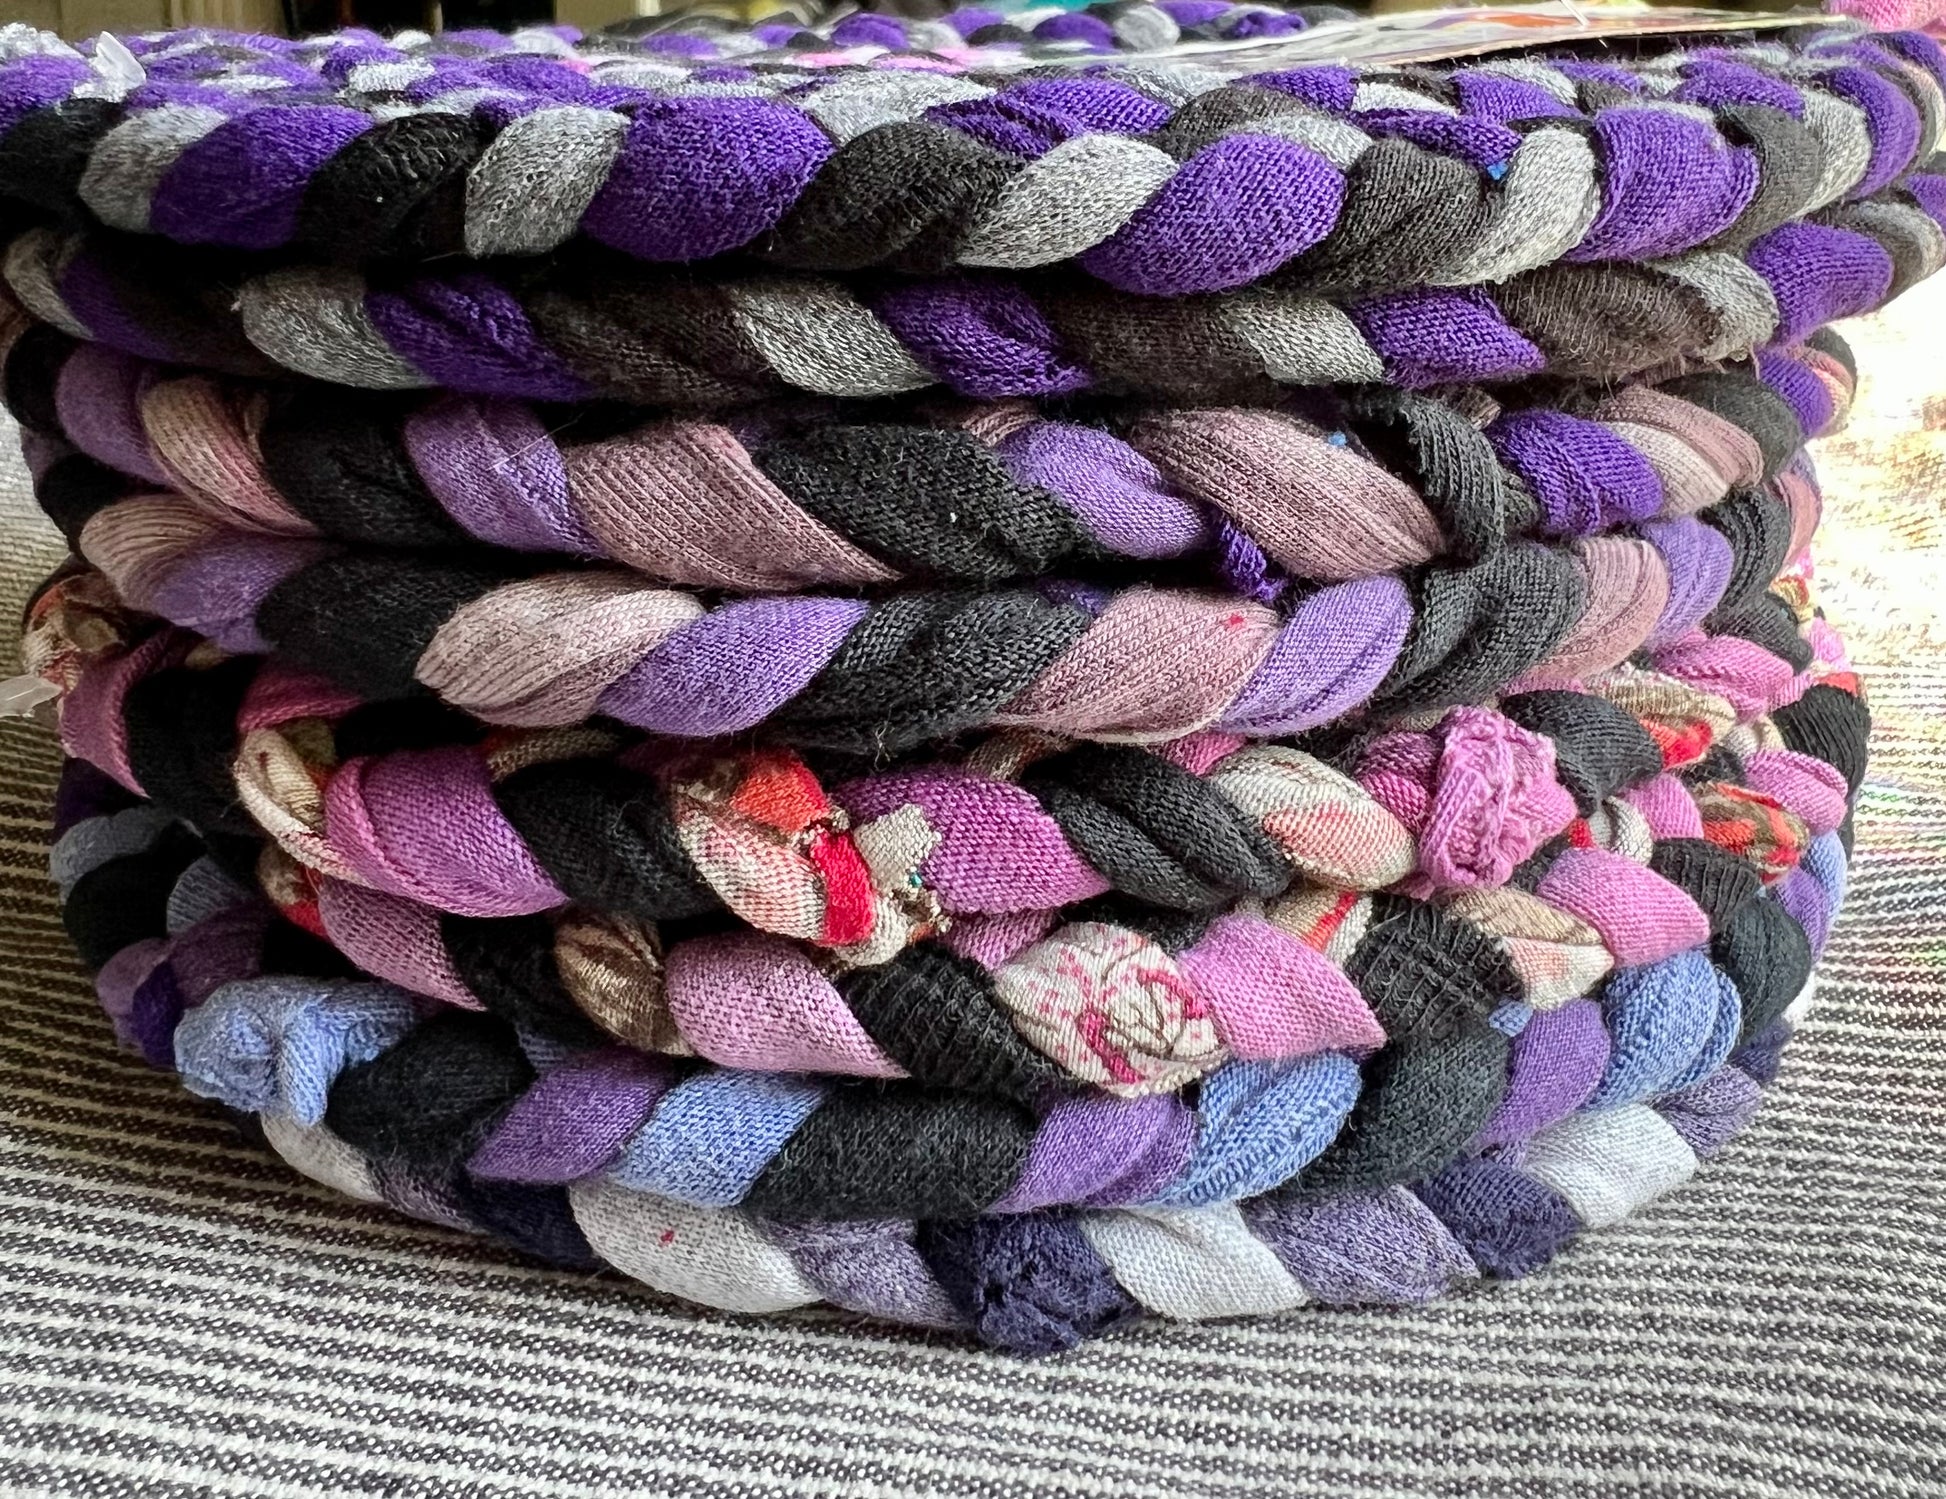 A stack of purple and pink trivets, side view.